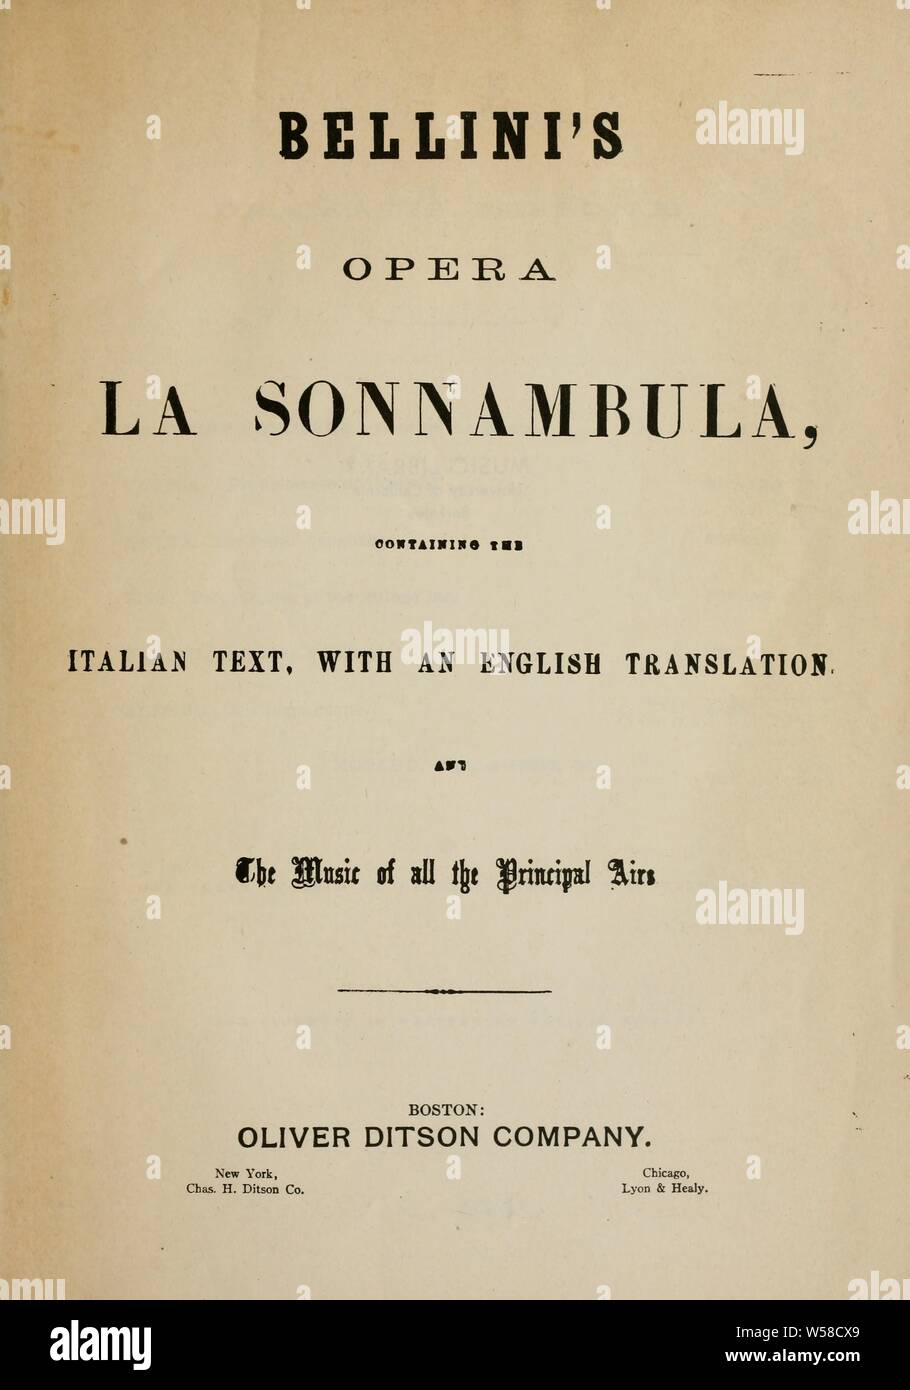 Bellini's opera, La sonnambula, containing the Italian text, with an English translation, and the music of all the principal airs : Bellini, Vincenzo, 1801-1835 Stock Photo